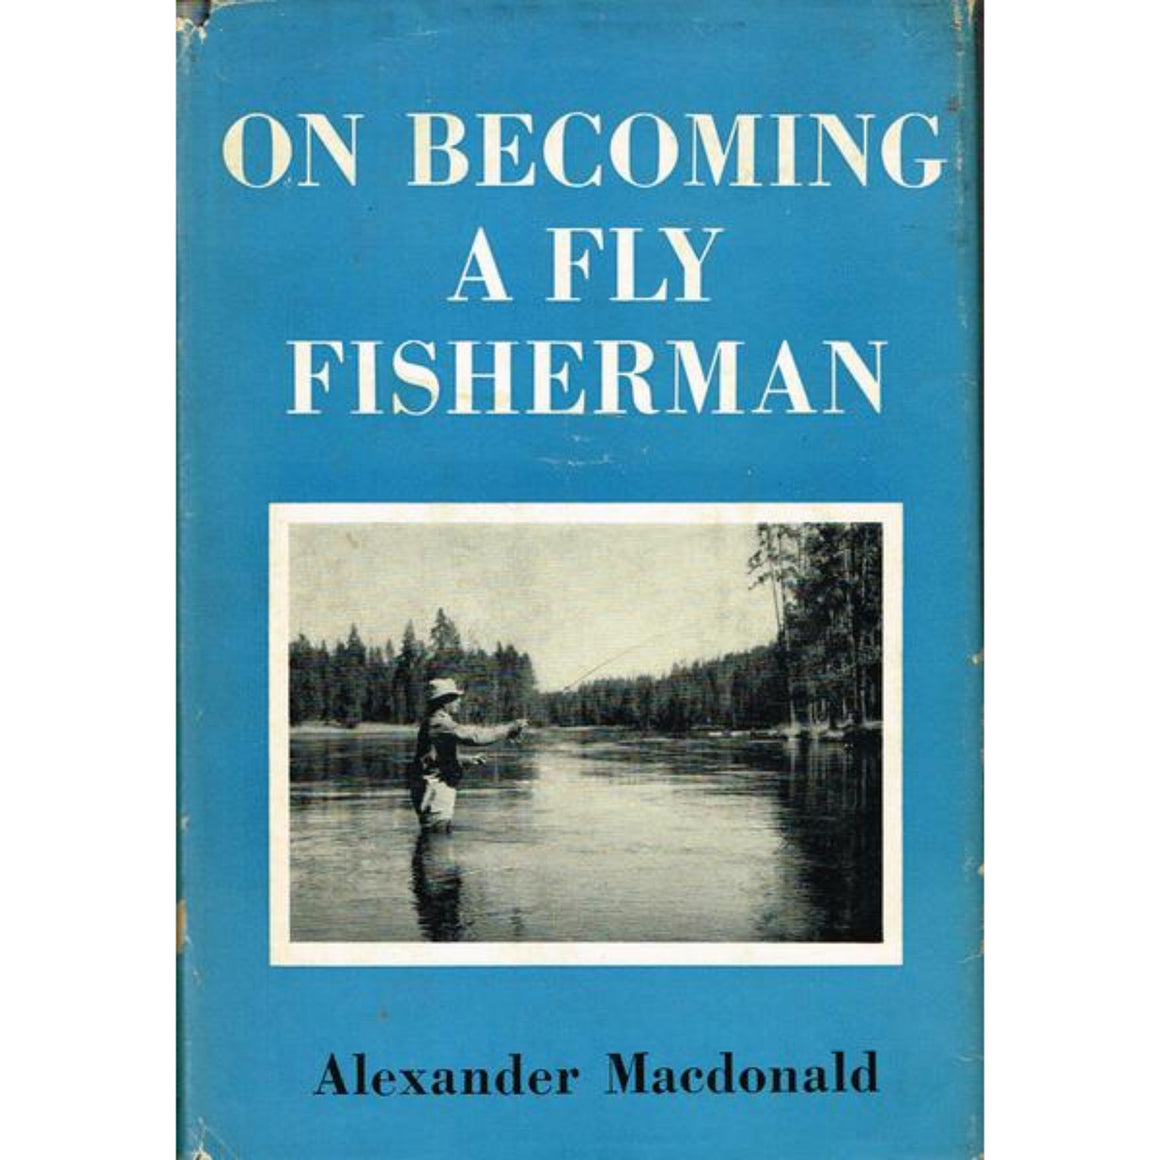 On Becoming a Fly Fisherman